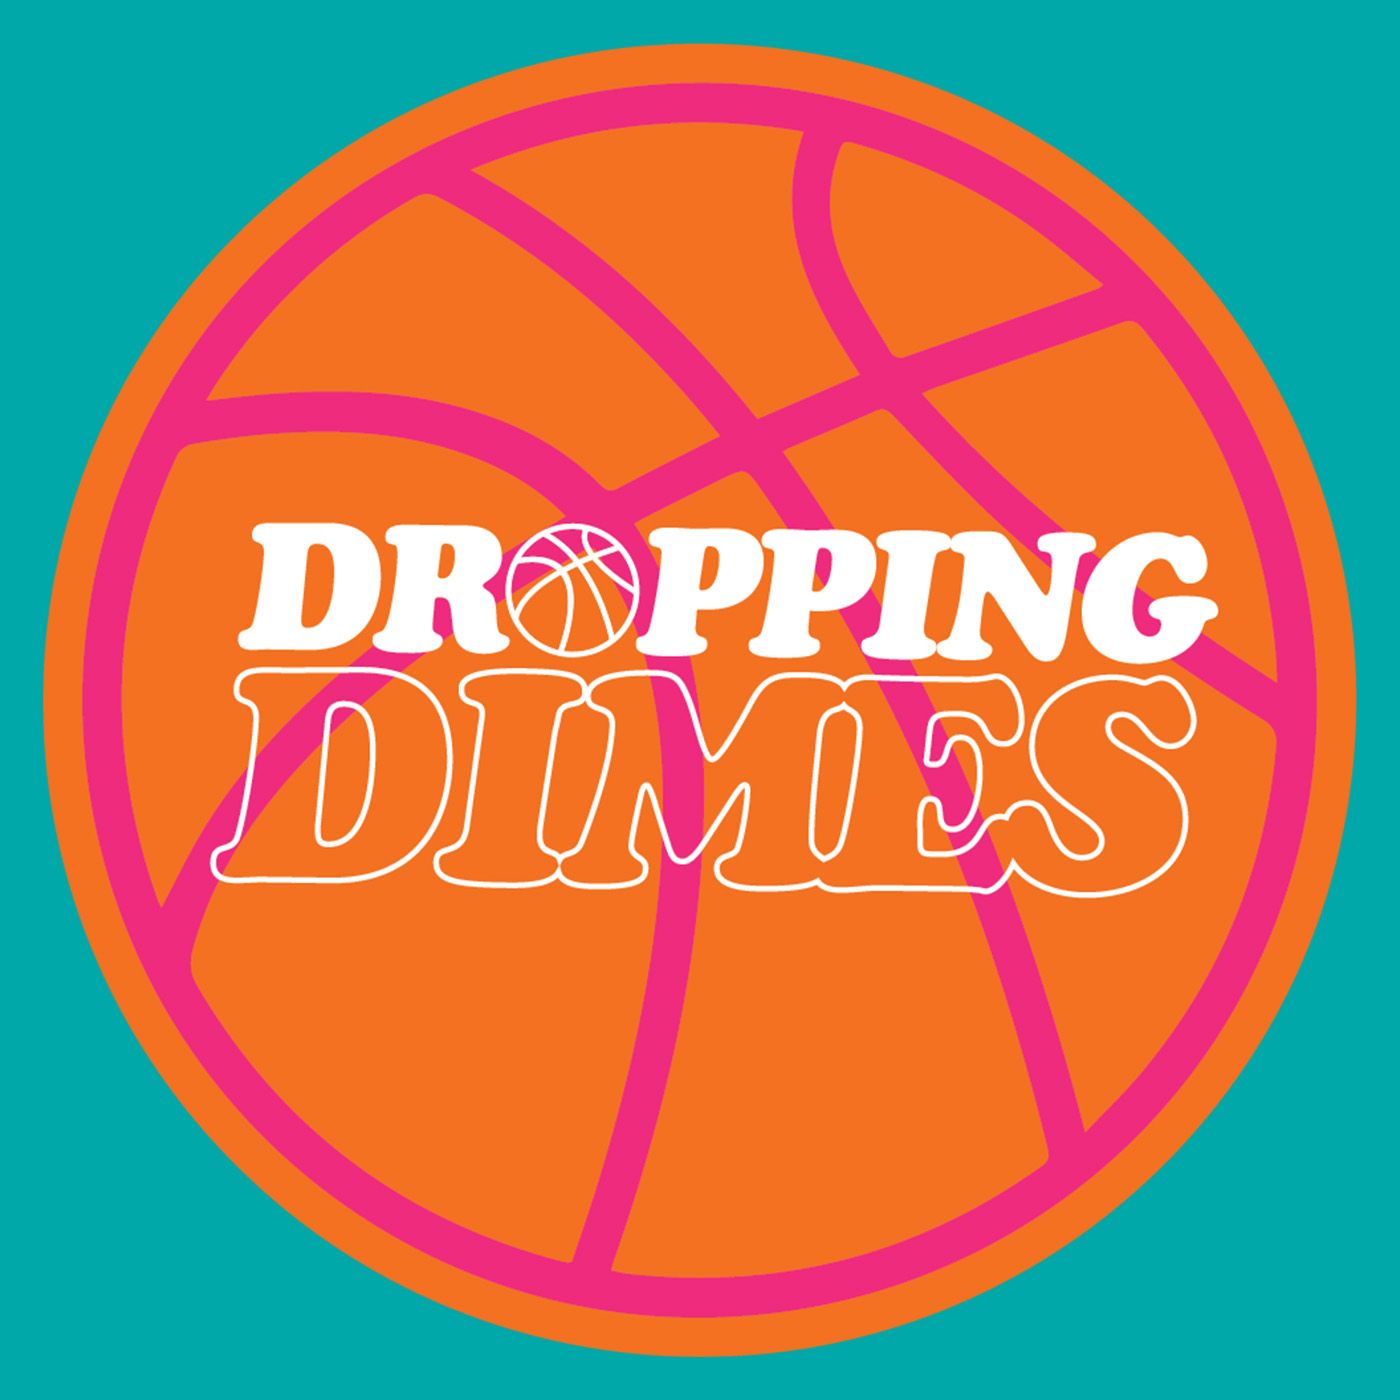 Dropping Dimes